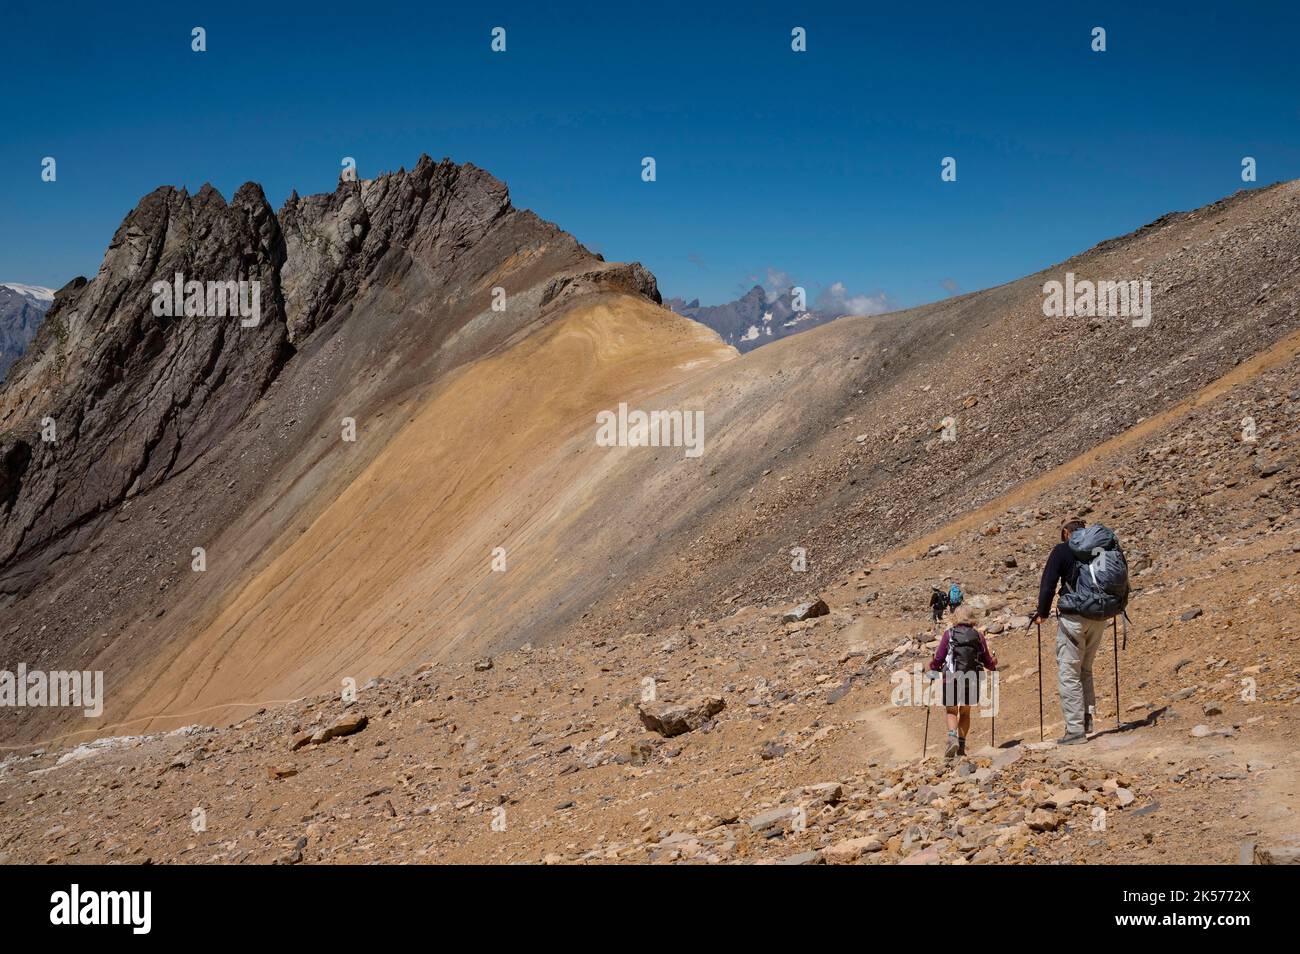 France, Savoie, Valmeinier, Thabor massif, trek around the Thabor; below the summit, group of hikers in the desert crossing towards the Col de la Chapelle, the Pointe des Angelières and the Aiguilles d'Arve Stock Photo